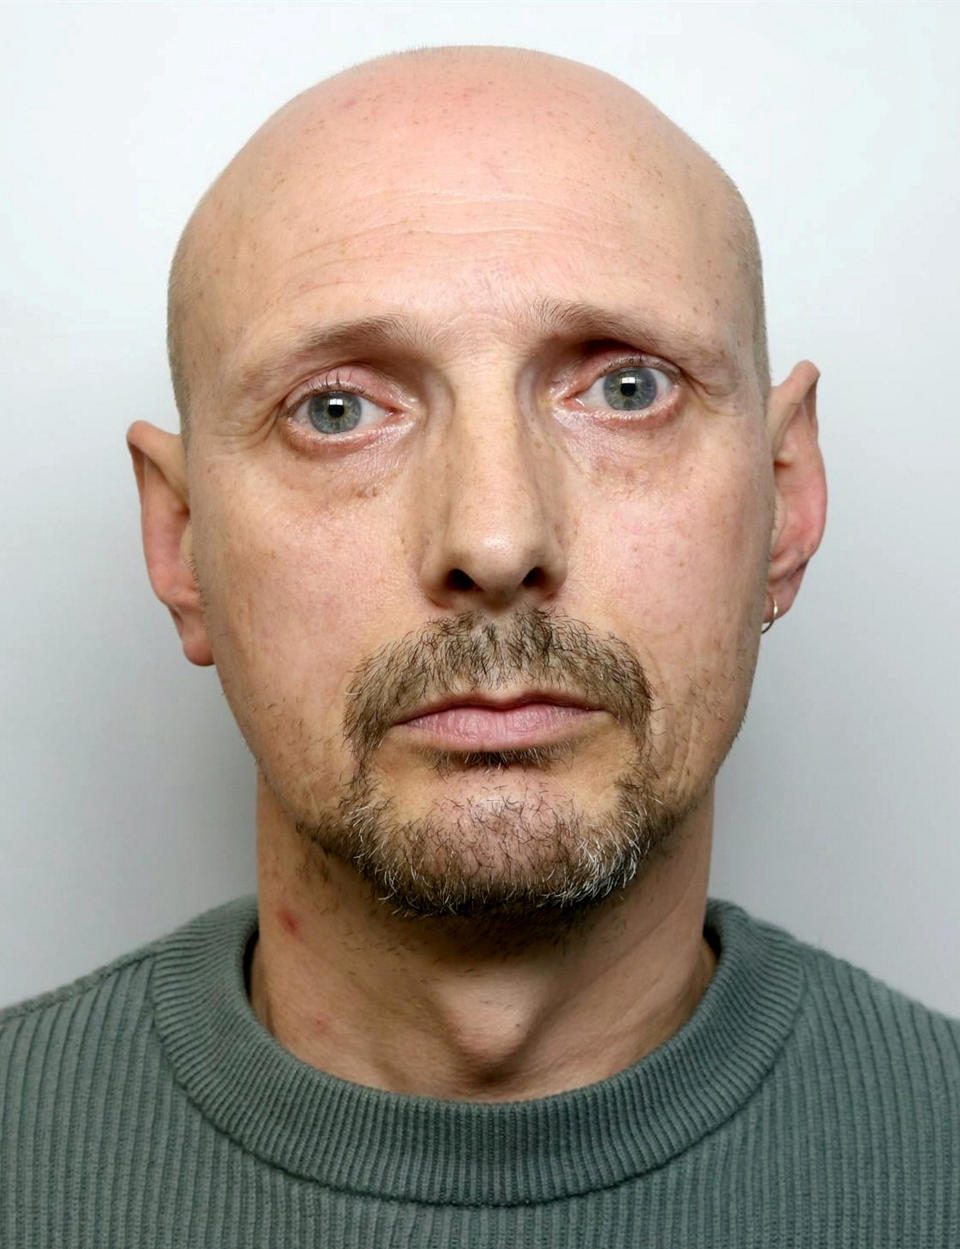 Alan Bird.  A violent dad who left his two-year-old son severely brain-damaged by smothering him has been jailed for life following his death 18 years after the attack.  See SWNS story SWLEguilty.  Alan Bird, 48, received the life sentence today (Mon) with a minimum eight year term after a jury convicted him following a trial at Leeds Crown court last week.   The abattoir manager inflicted permanent and irreparable brain damage on Lewis by suffocating him in an attack in 2001 when his son was just two years old.  He had already served an eight-year prison sentence over this initial attack after he pleaded guilty to inflicting grievous bodily harm with intent over the assault.  But he was re-arrested and put on trial for murder after Lewis' death in July 2019.  Prosecutors said he is criminally responsible for his death and a jury returned a unanimous guilty verdict on Tuesday (March 22). 